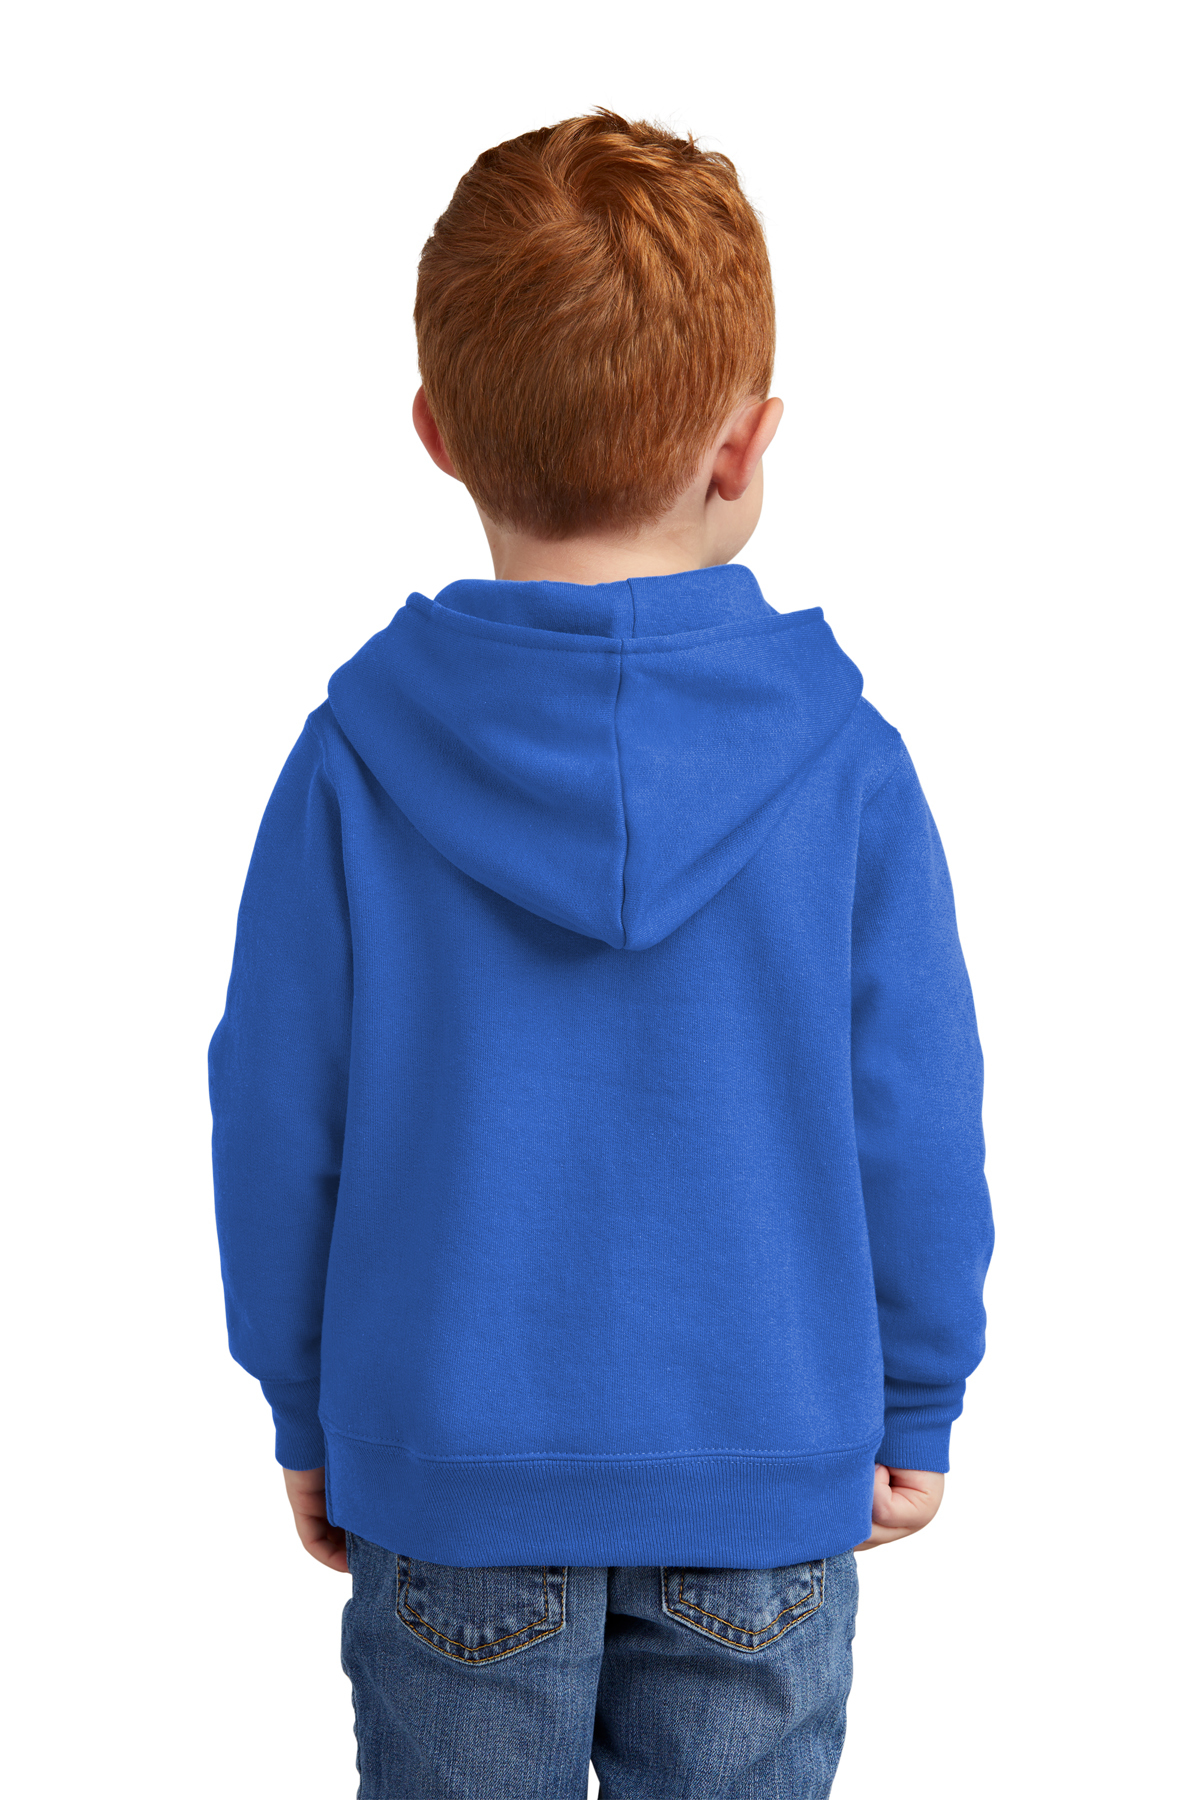 Company | Port Port Product Toddler Sweatshirt Company Fleece | & Pullover Core Hooded &